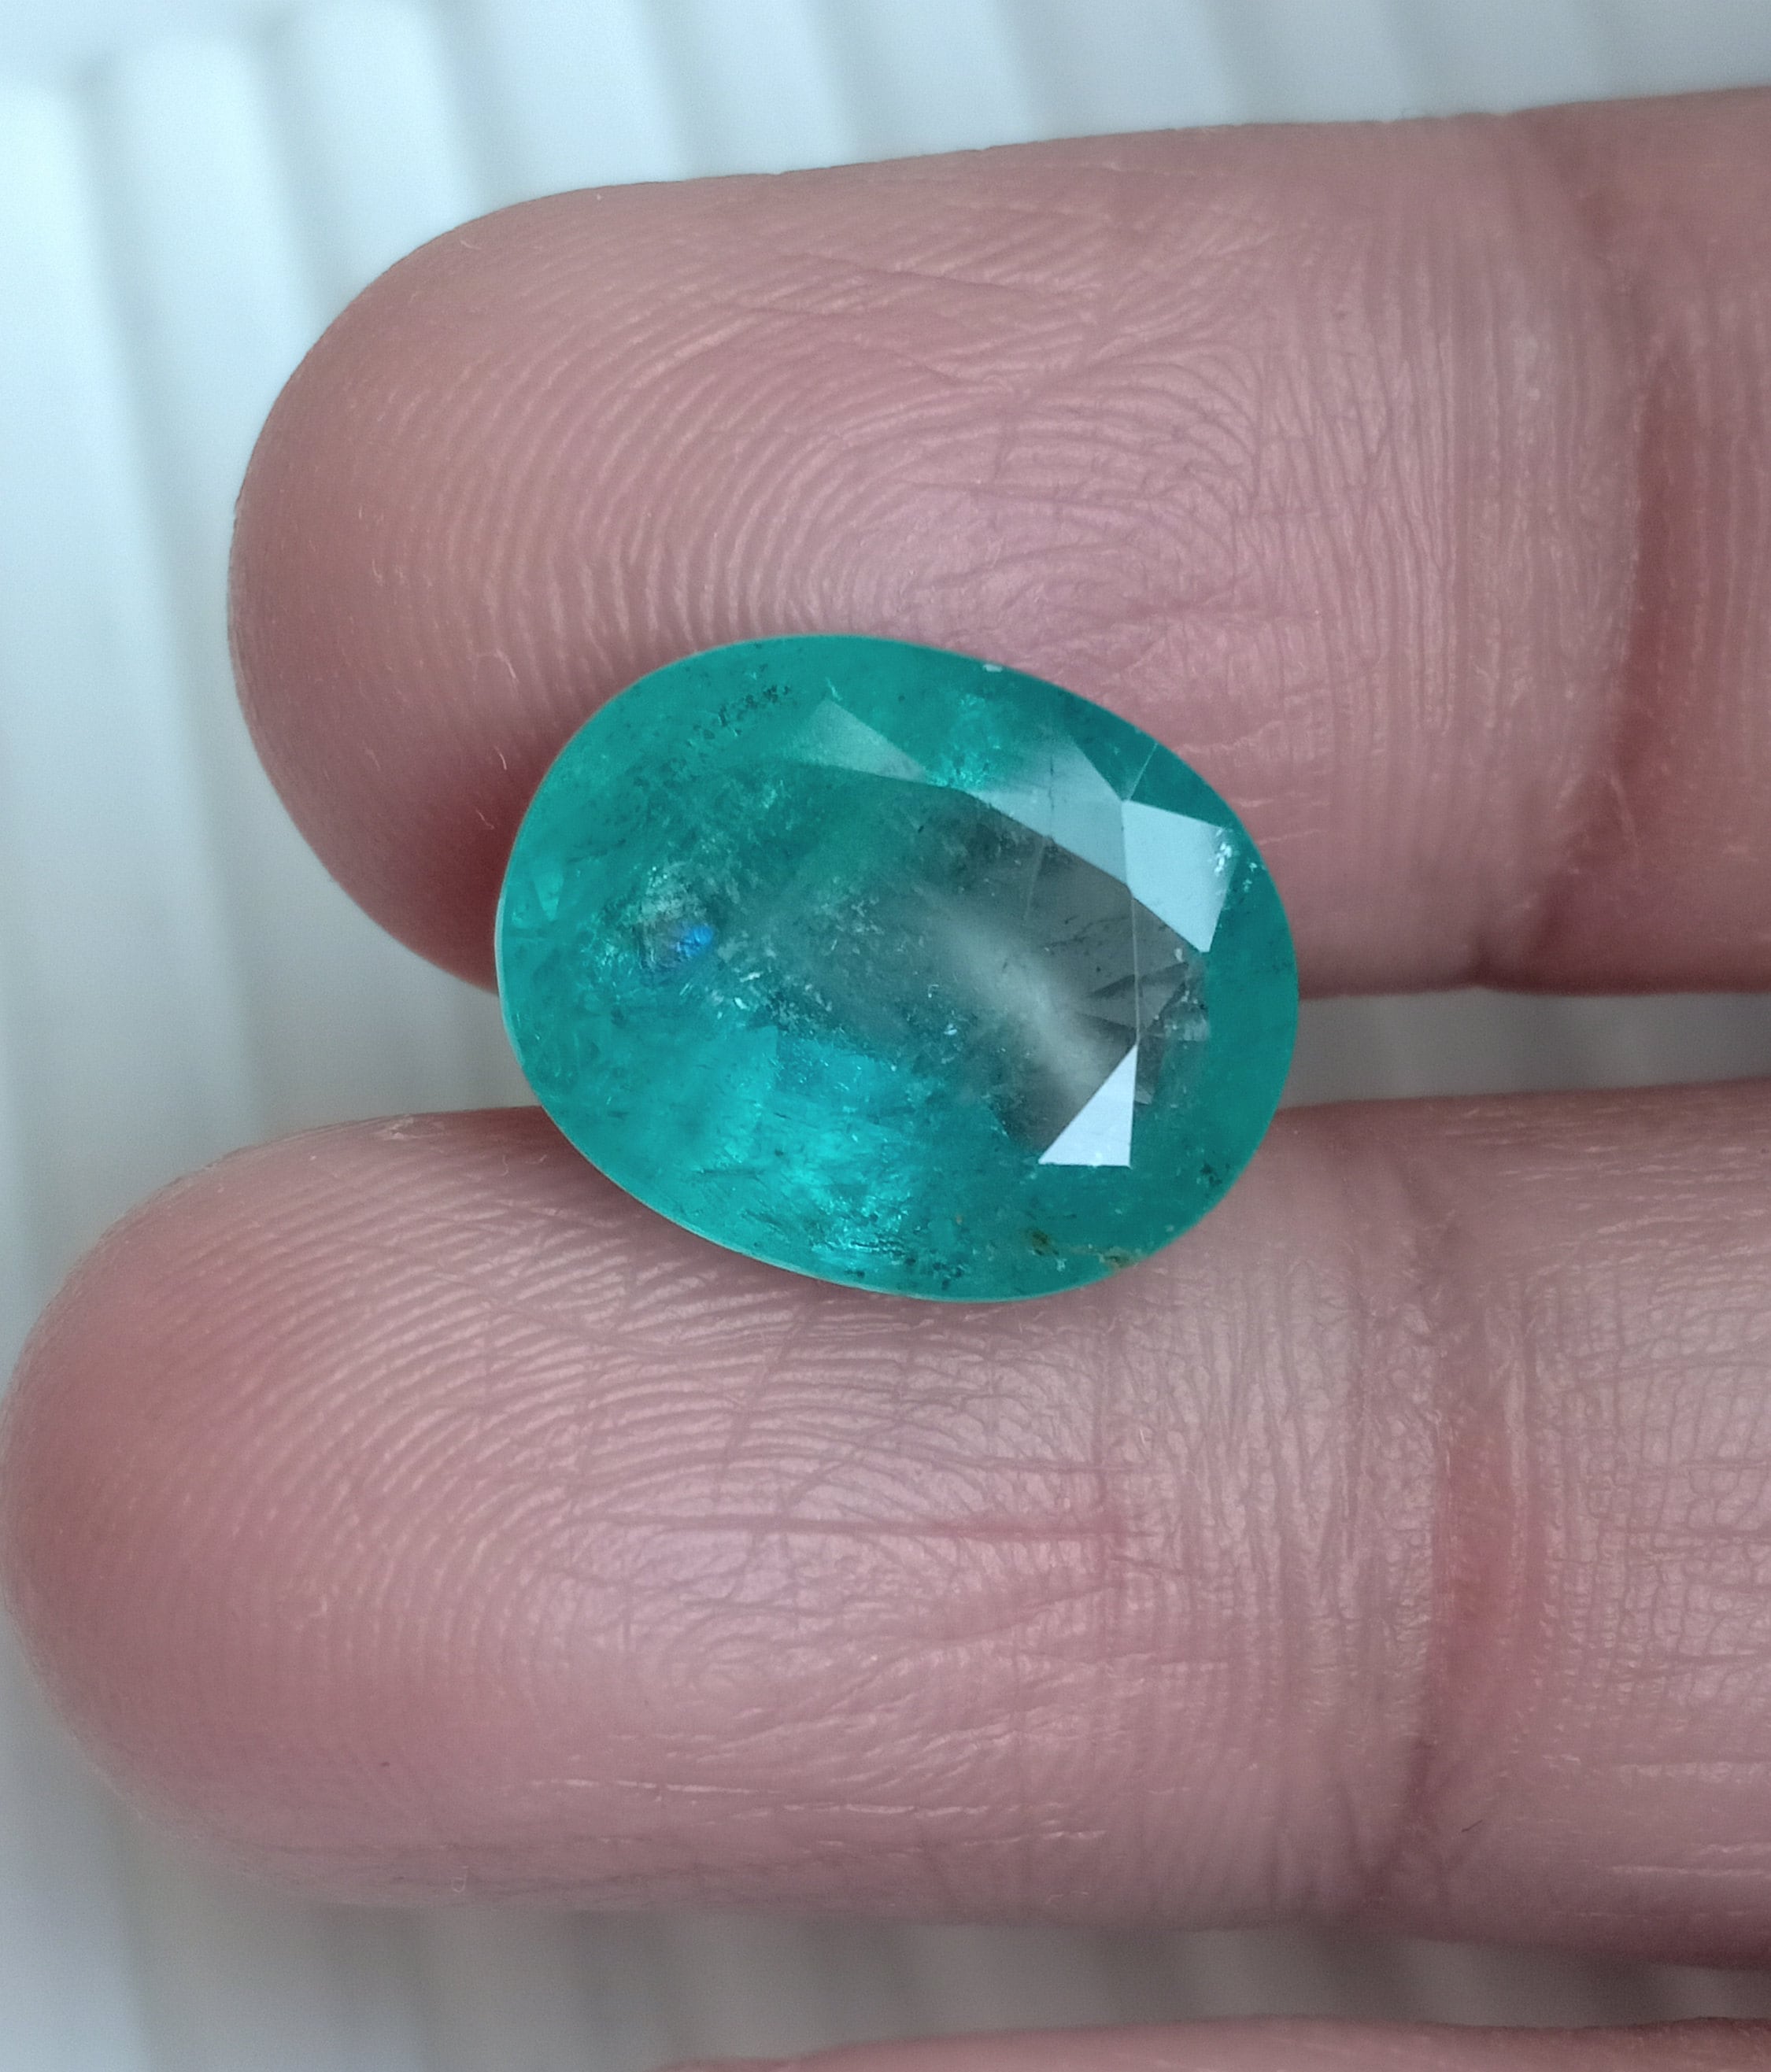 Vintage Large Emerald Oval, Natural Green Emerald Handmade Gemstone, Genuine Quality Emerald Gemstone, Faceted 14×11×6.6 MM Emerald.thumbnail